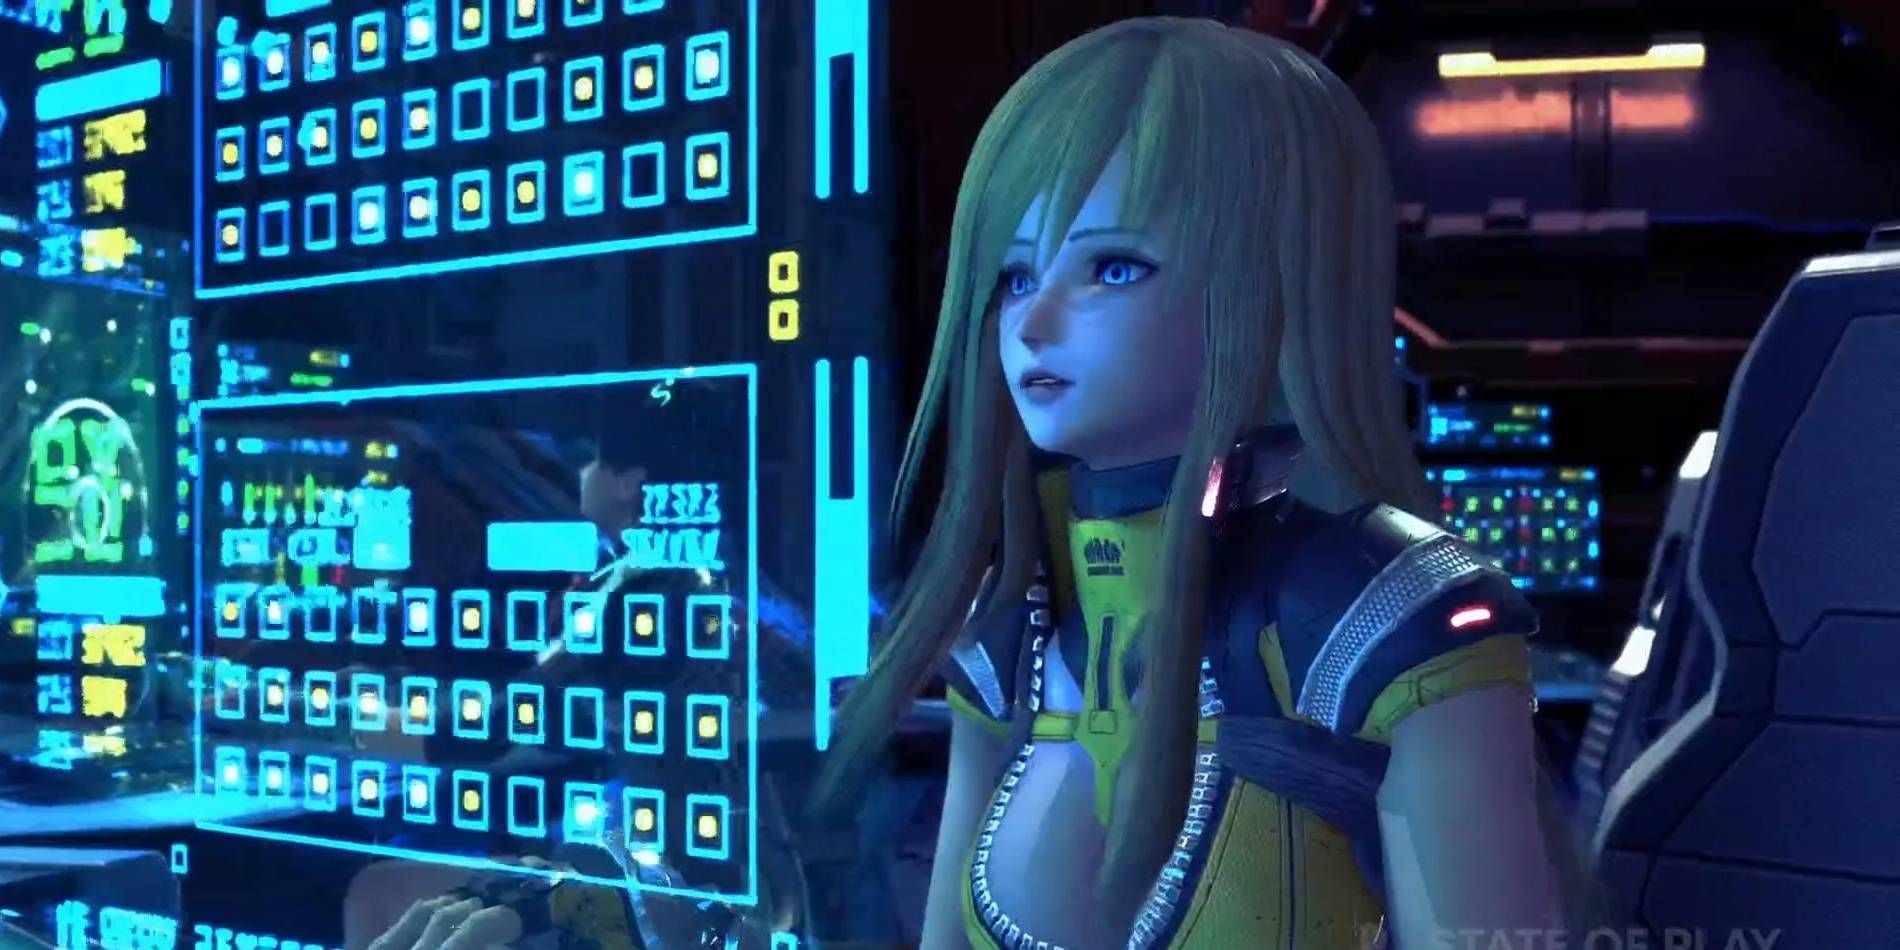 Star Ocean: The Divine Force Elena Typing at Computer For Sci-Fi Story Route of Protagonist Raymond 